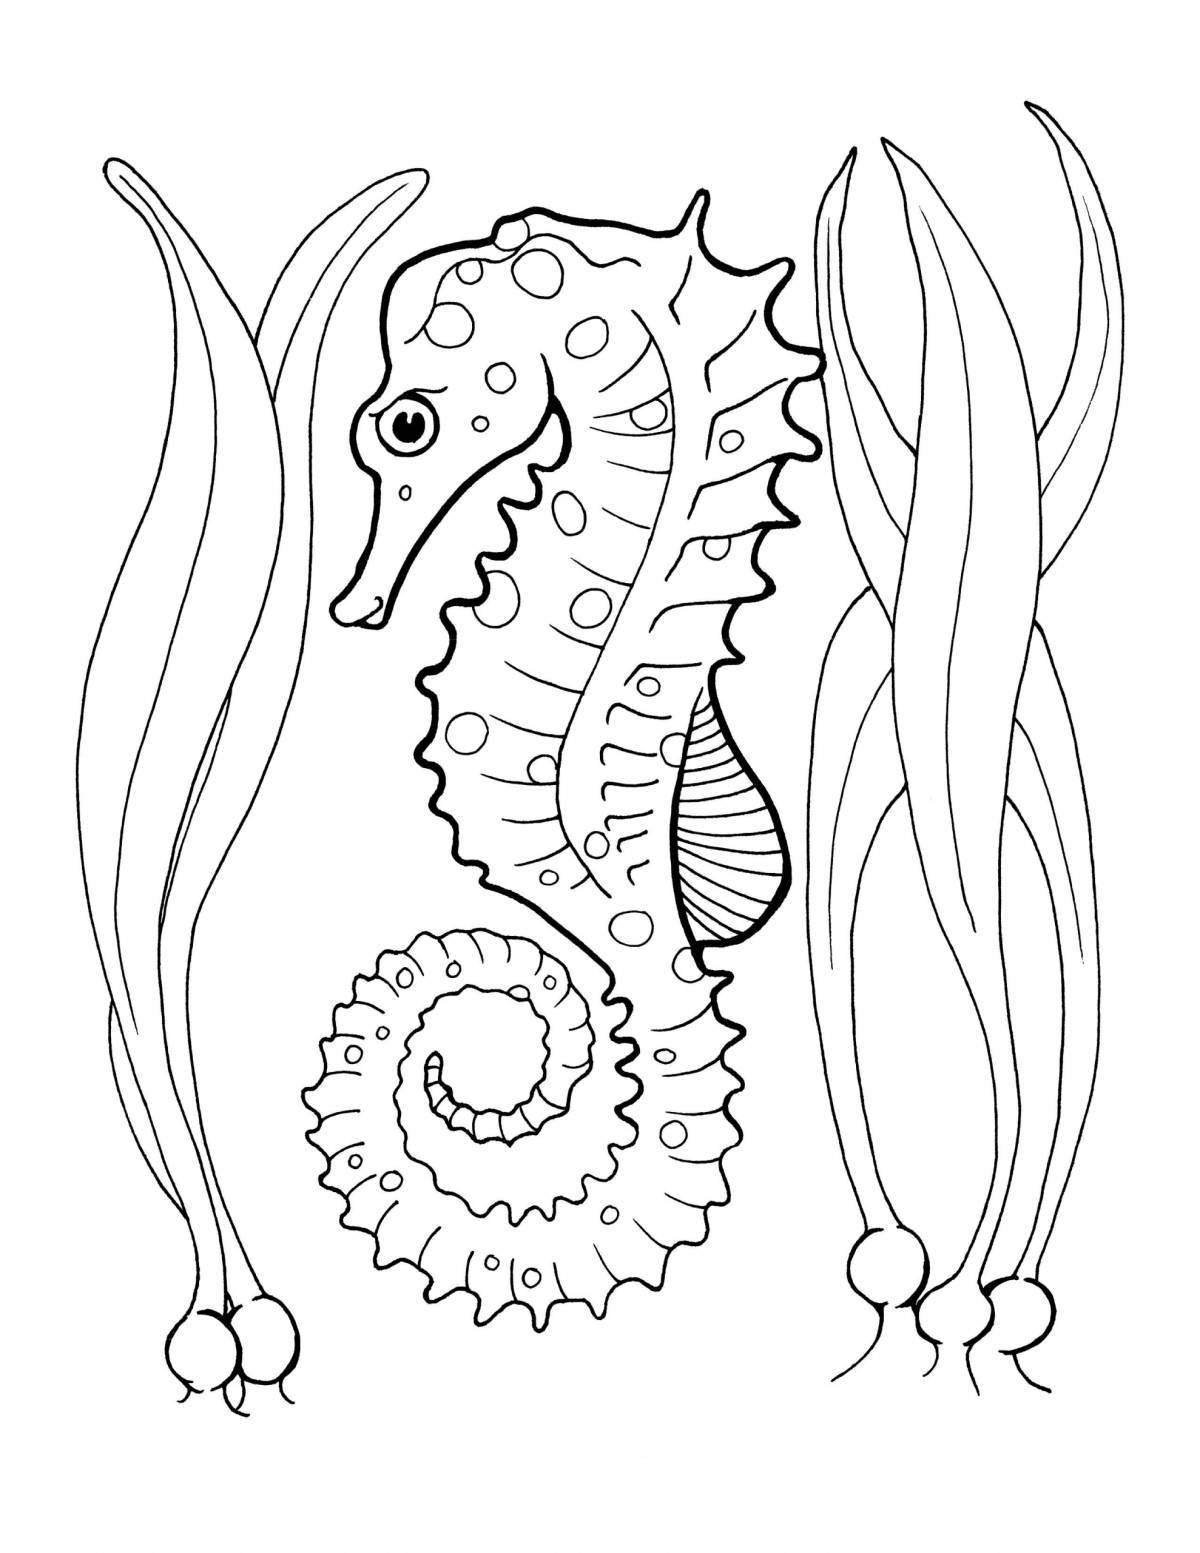 Fabulous seahorses coloring pages for kids